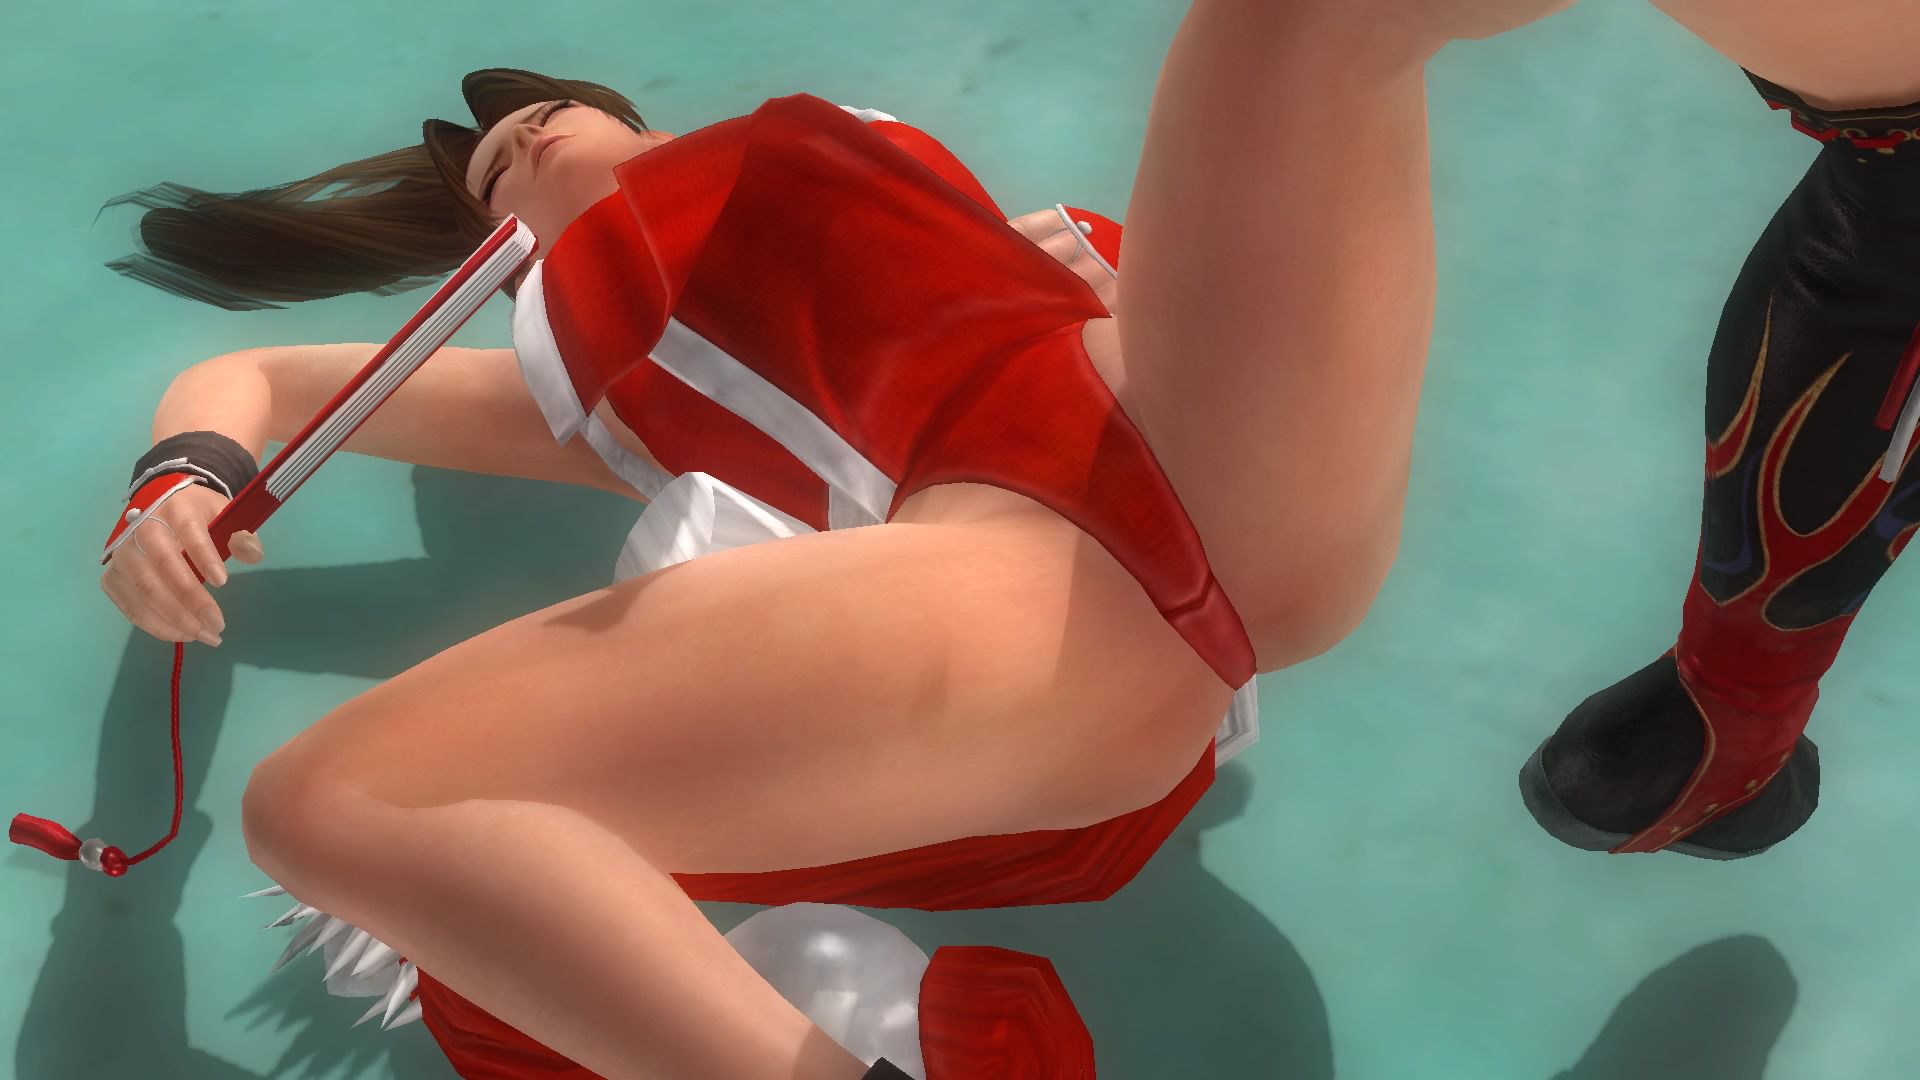 DOA5LR cheongsam delivery special! Elo slit not costume featured 42